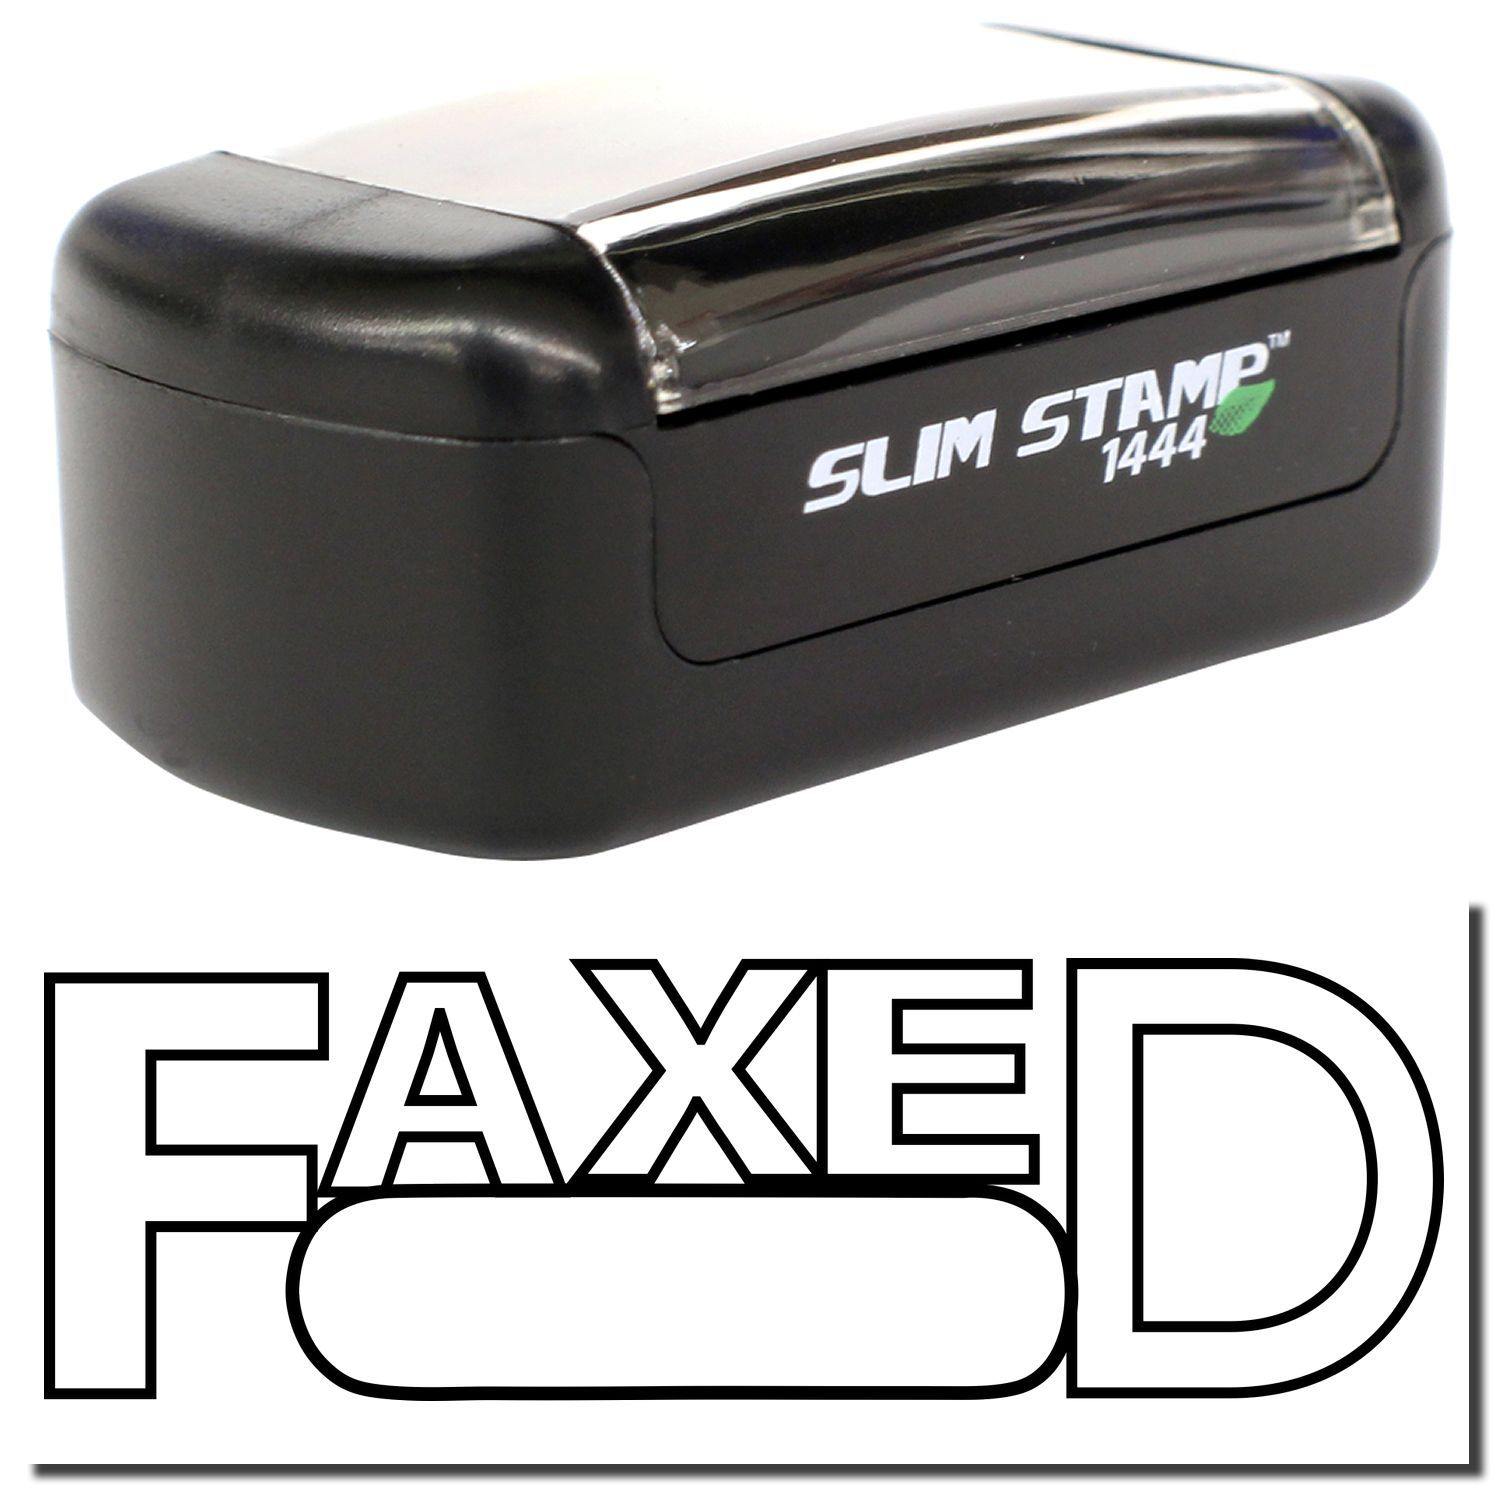 A stock office pre-inked stamp with a stamped image showing how the text "FAXED" in outline font and with a round date box is displayed after stamping.